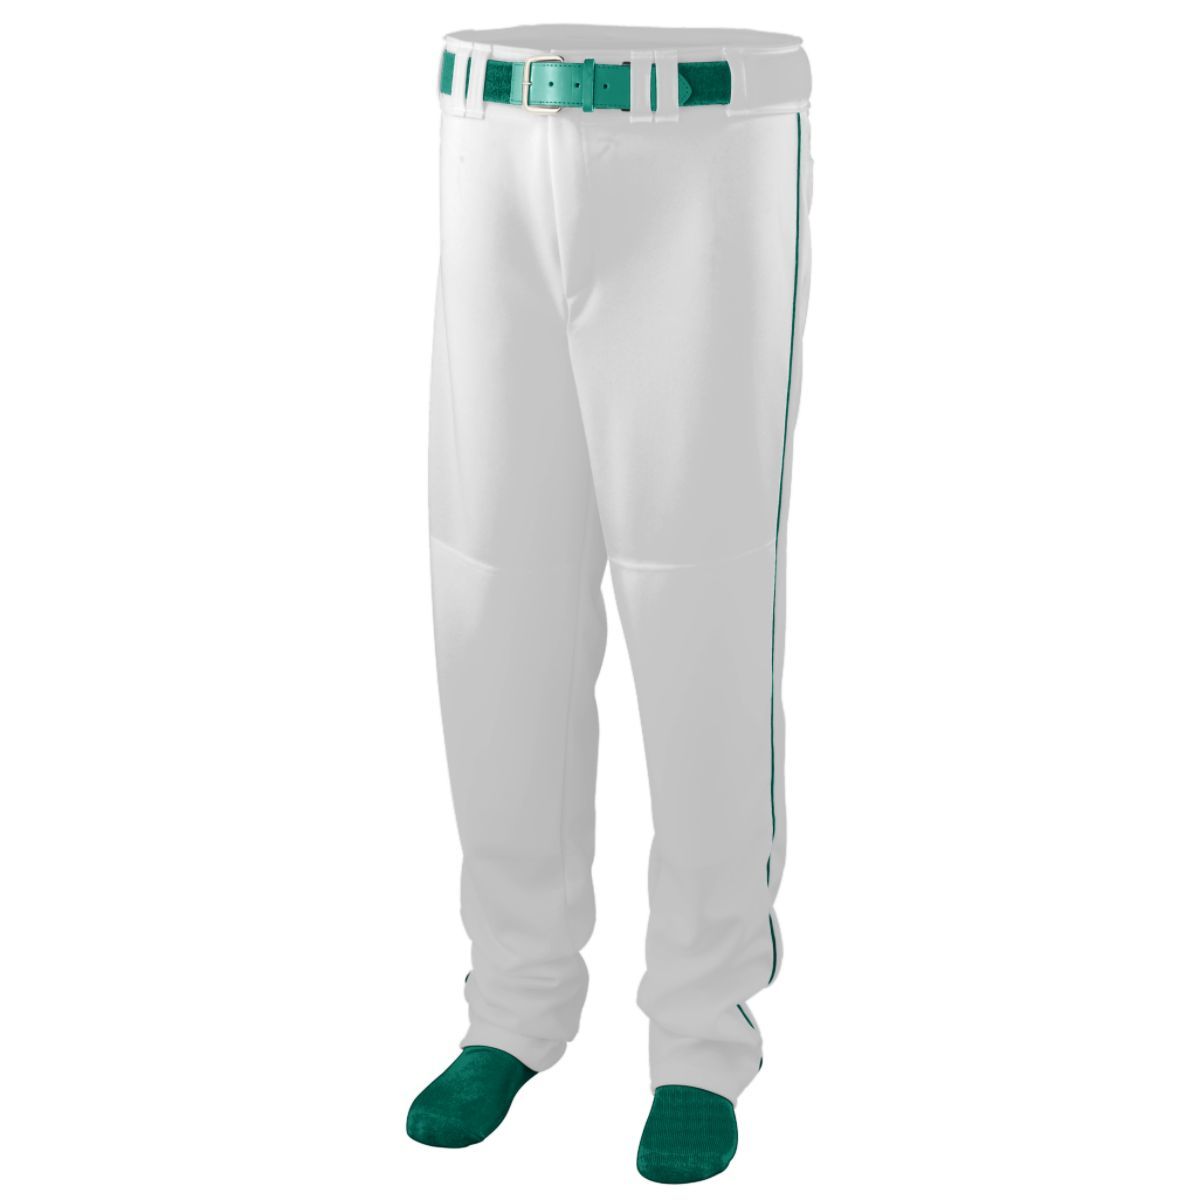 Augusta Sportswear Series Baseball/Softball Pant With Piping in White/Dark Green  -Part of the Adult, Adult-Pants, Pants, Augusta-Products, Baseball, All-Sports, All-Sports-1 product lines at KanaleyCreations.com